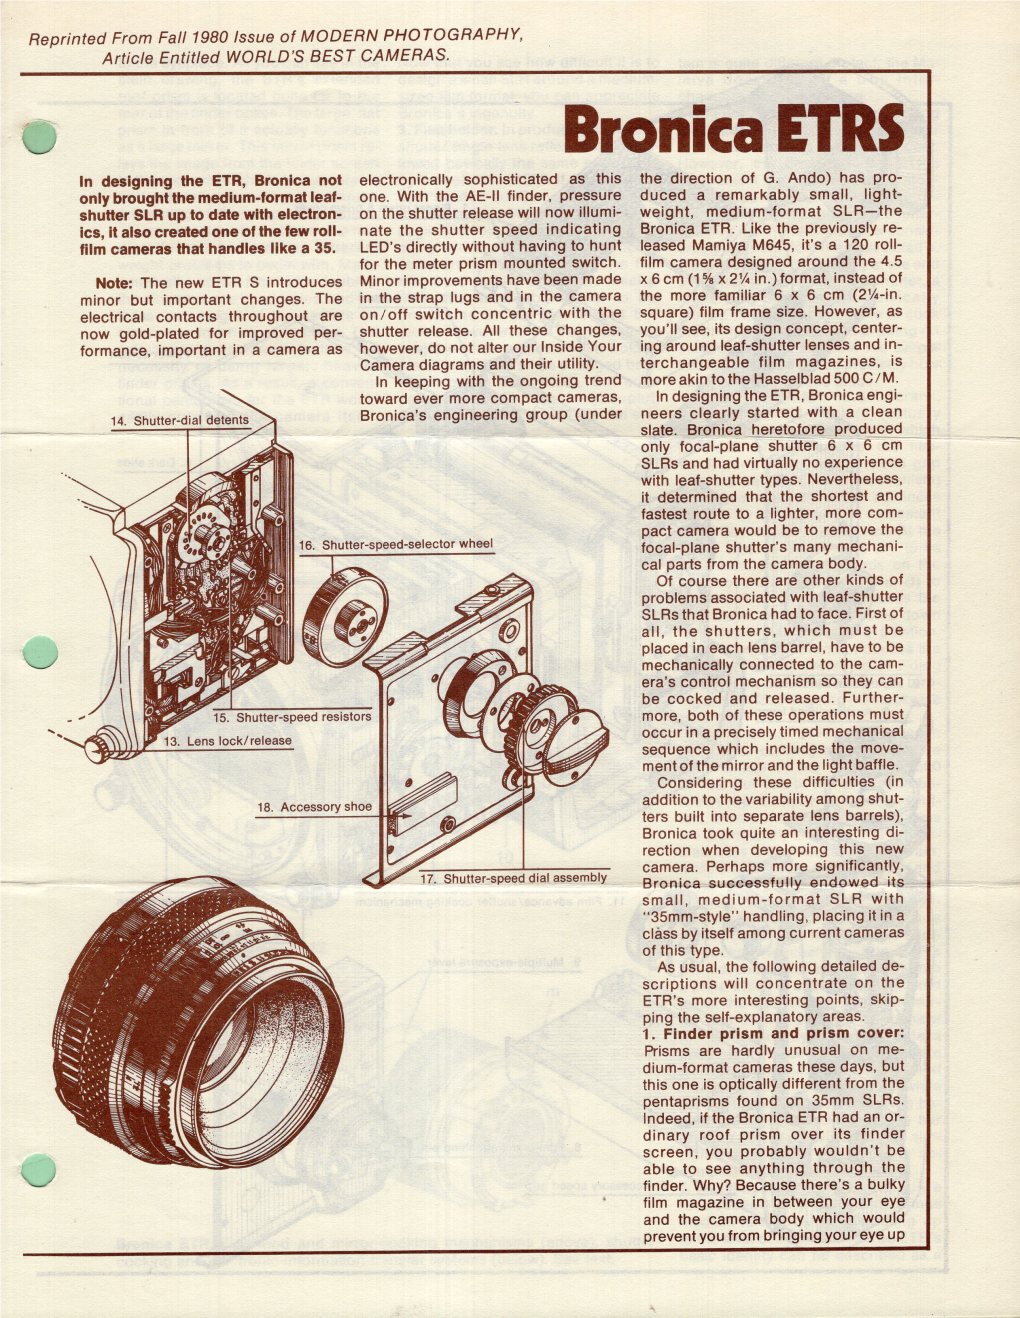 Bronica ETRS in Designing the ETR, Bronlca Not Electronically Sophisticated As This the Direction of G